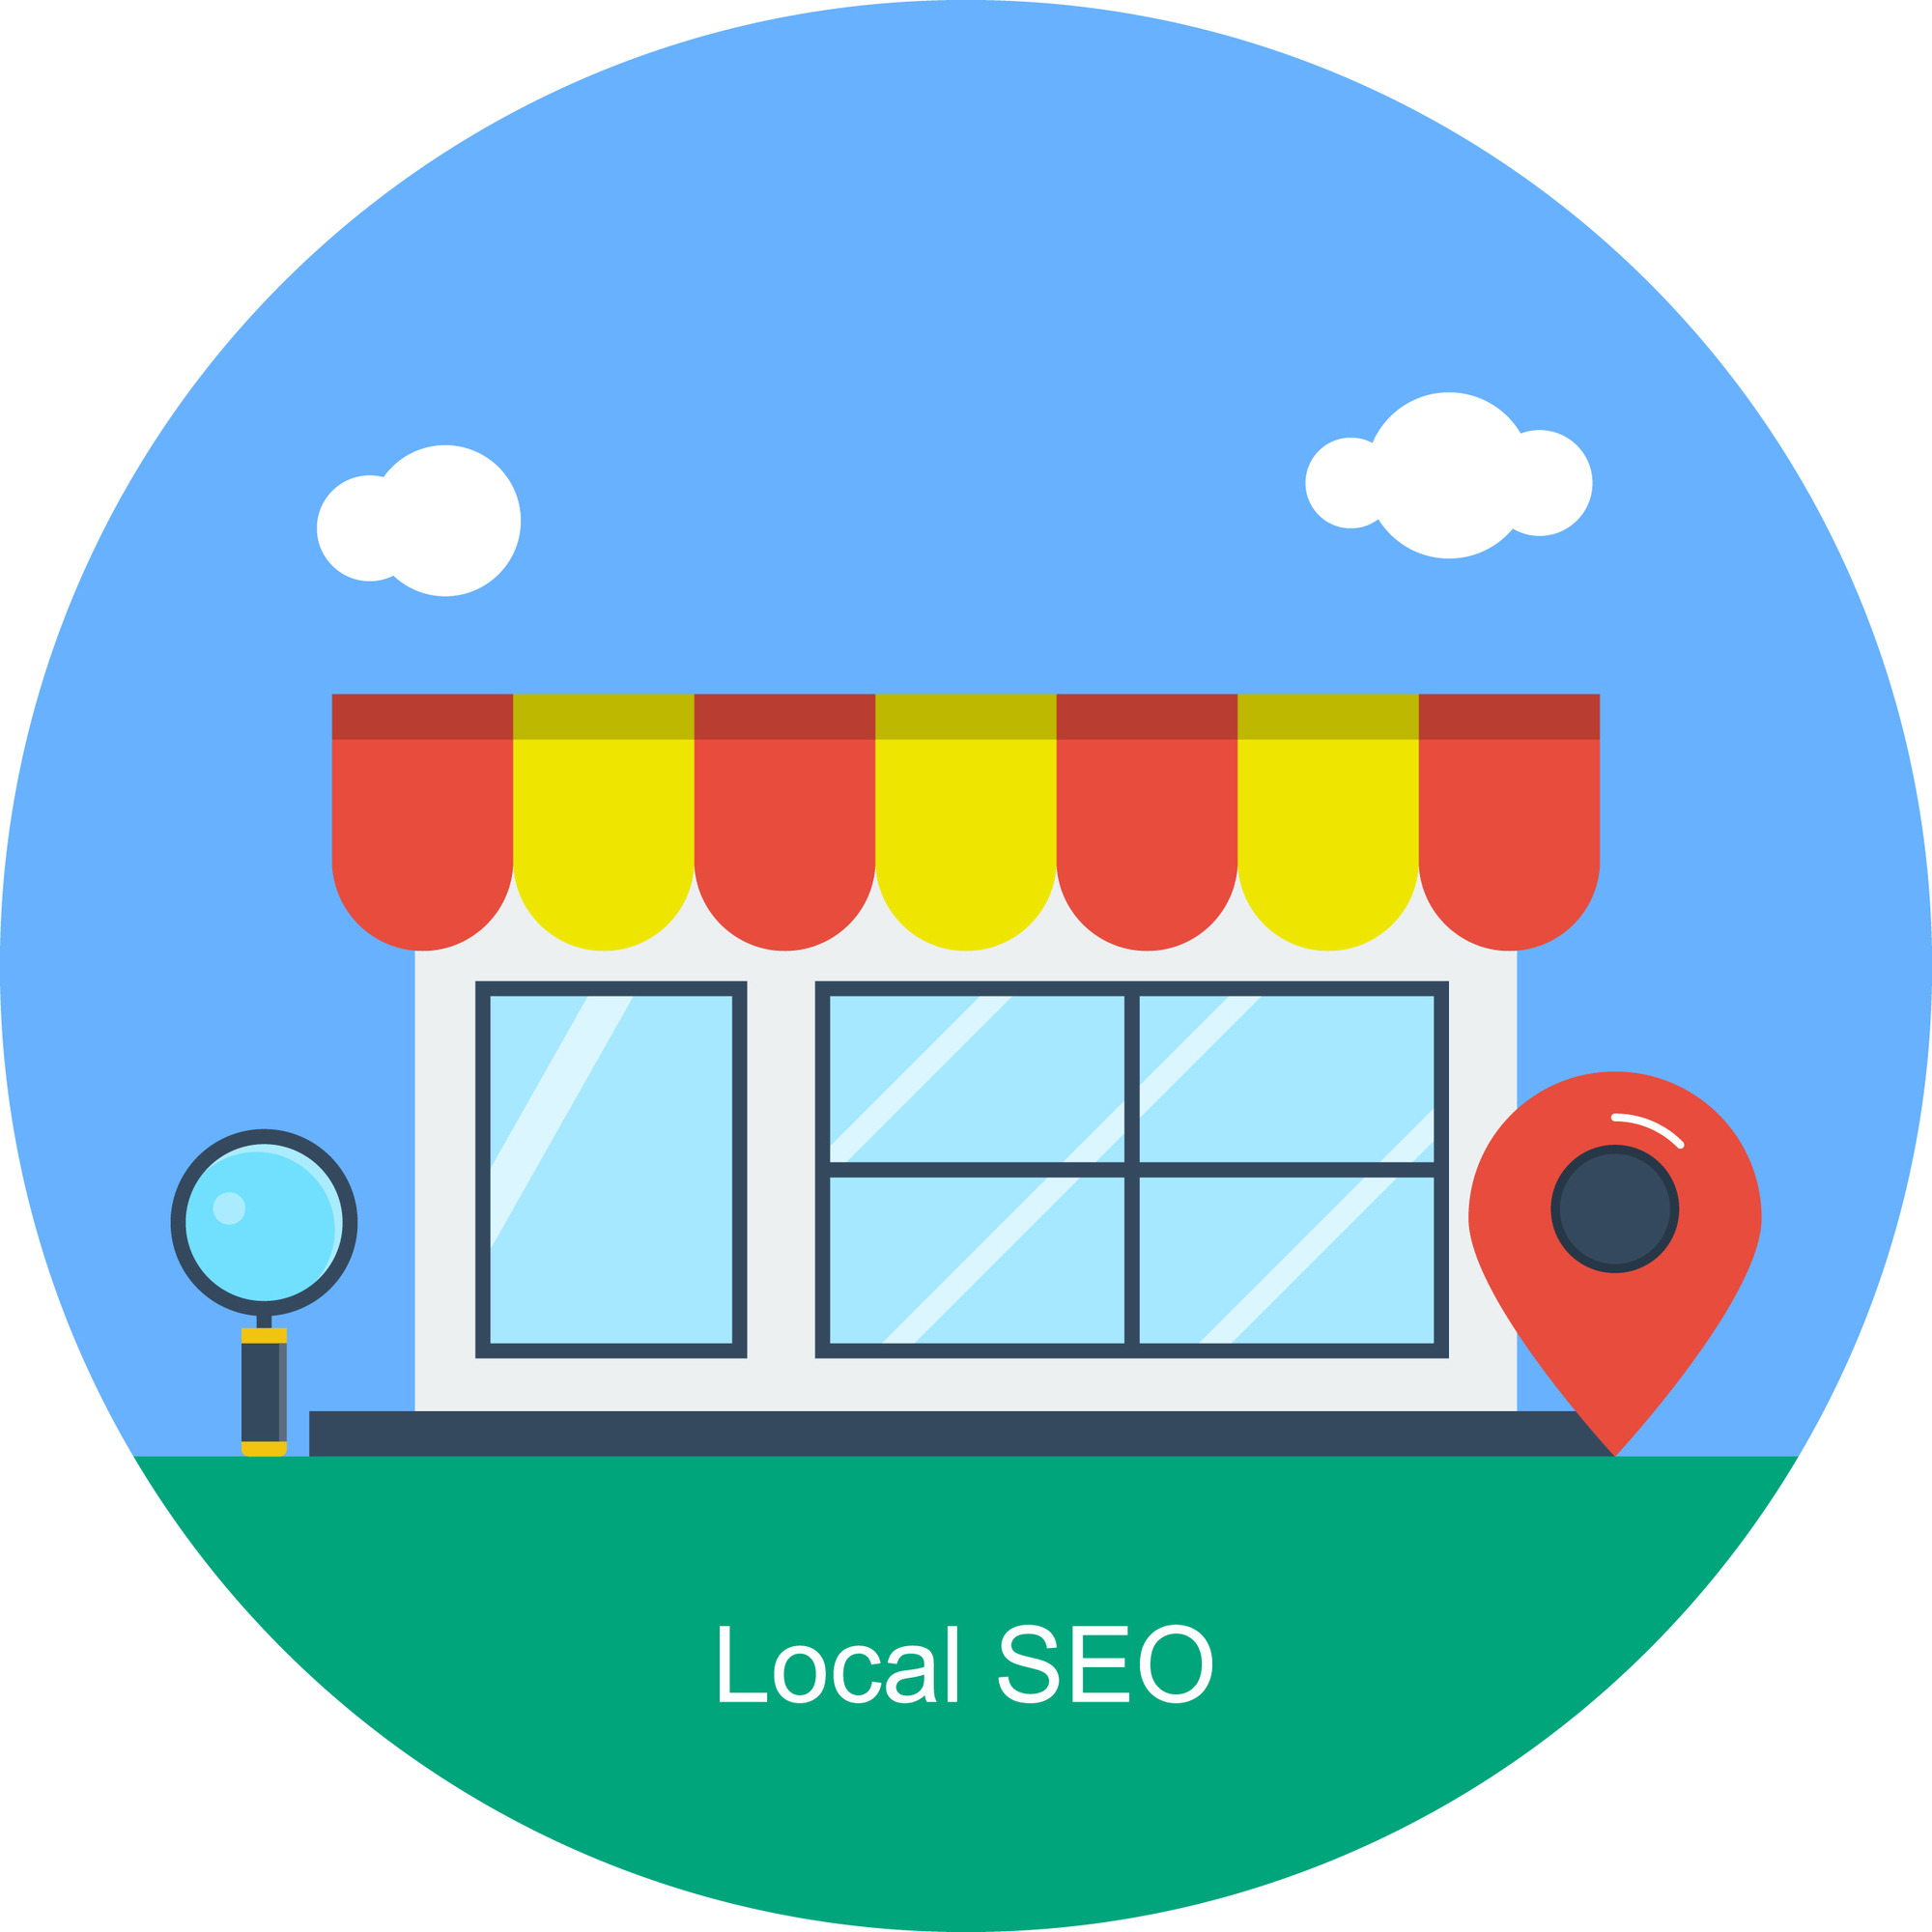 Illustration of local search. Google is testing showing Google Business Posts in search results.